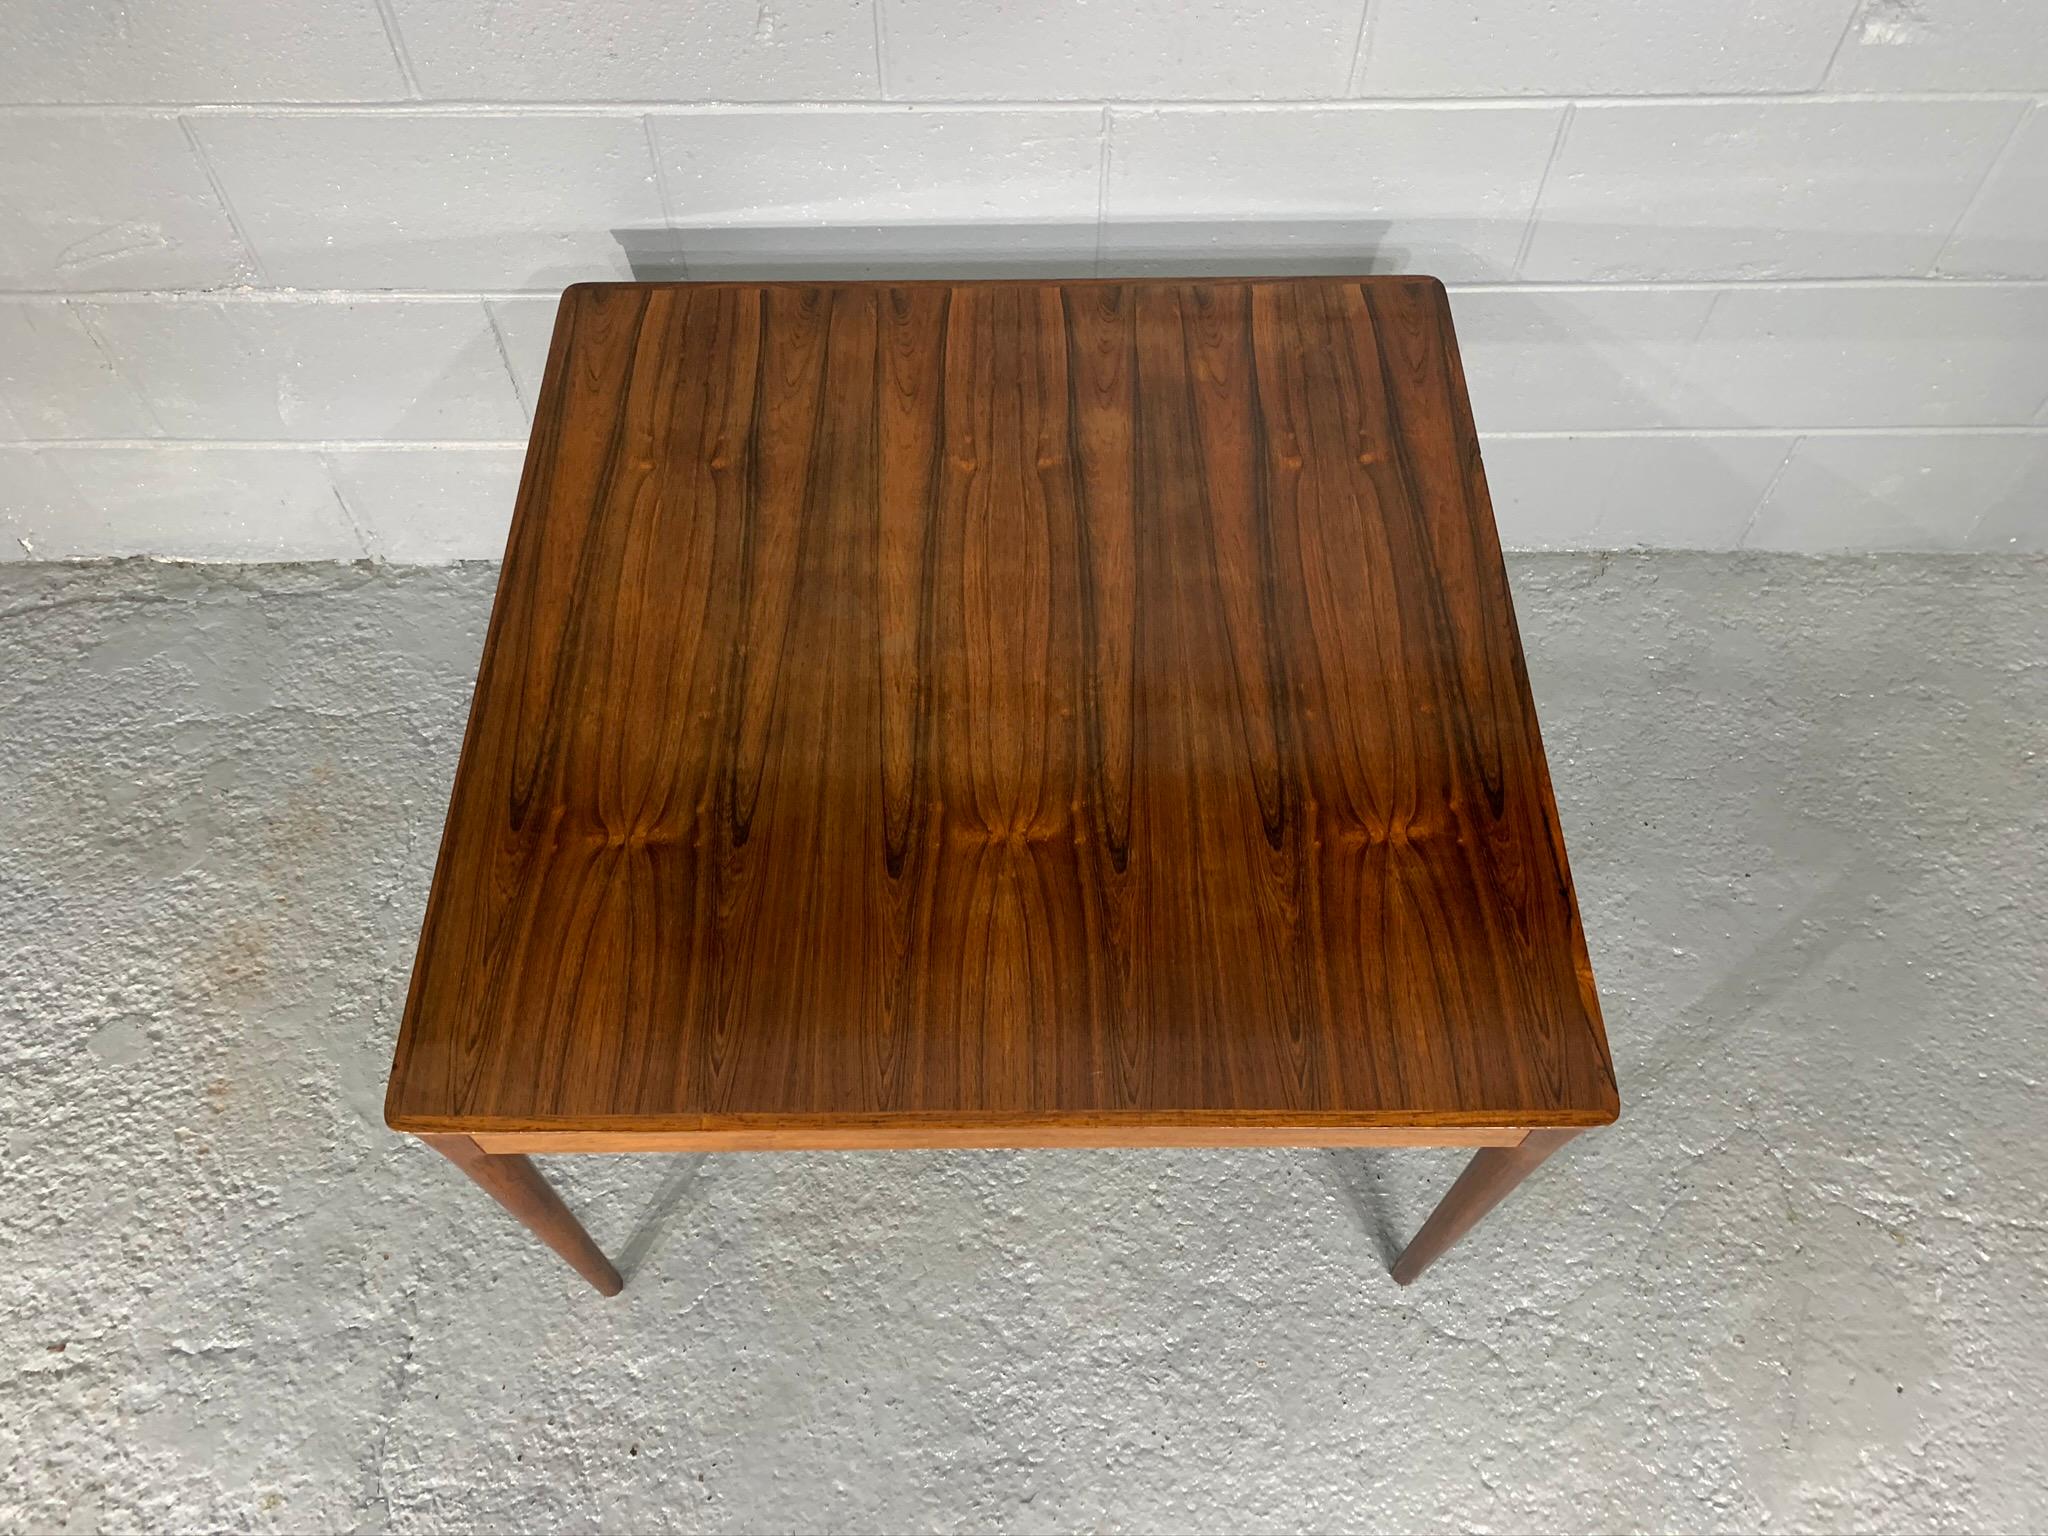 Square Danish Modern Midcentury Rosewood Coffee Table by Uldum Møbelfabrik In Good Condition For Sale In Belmont, MA